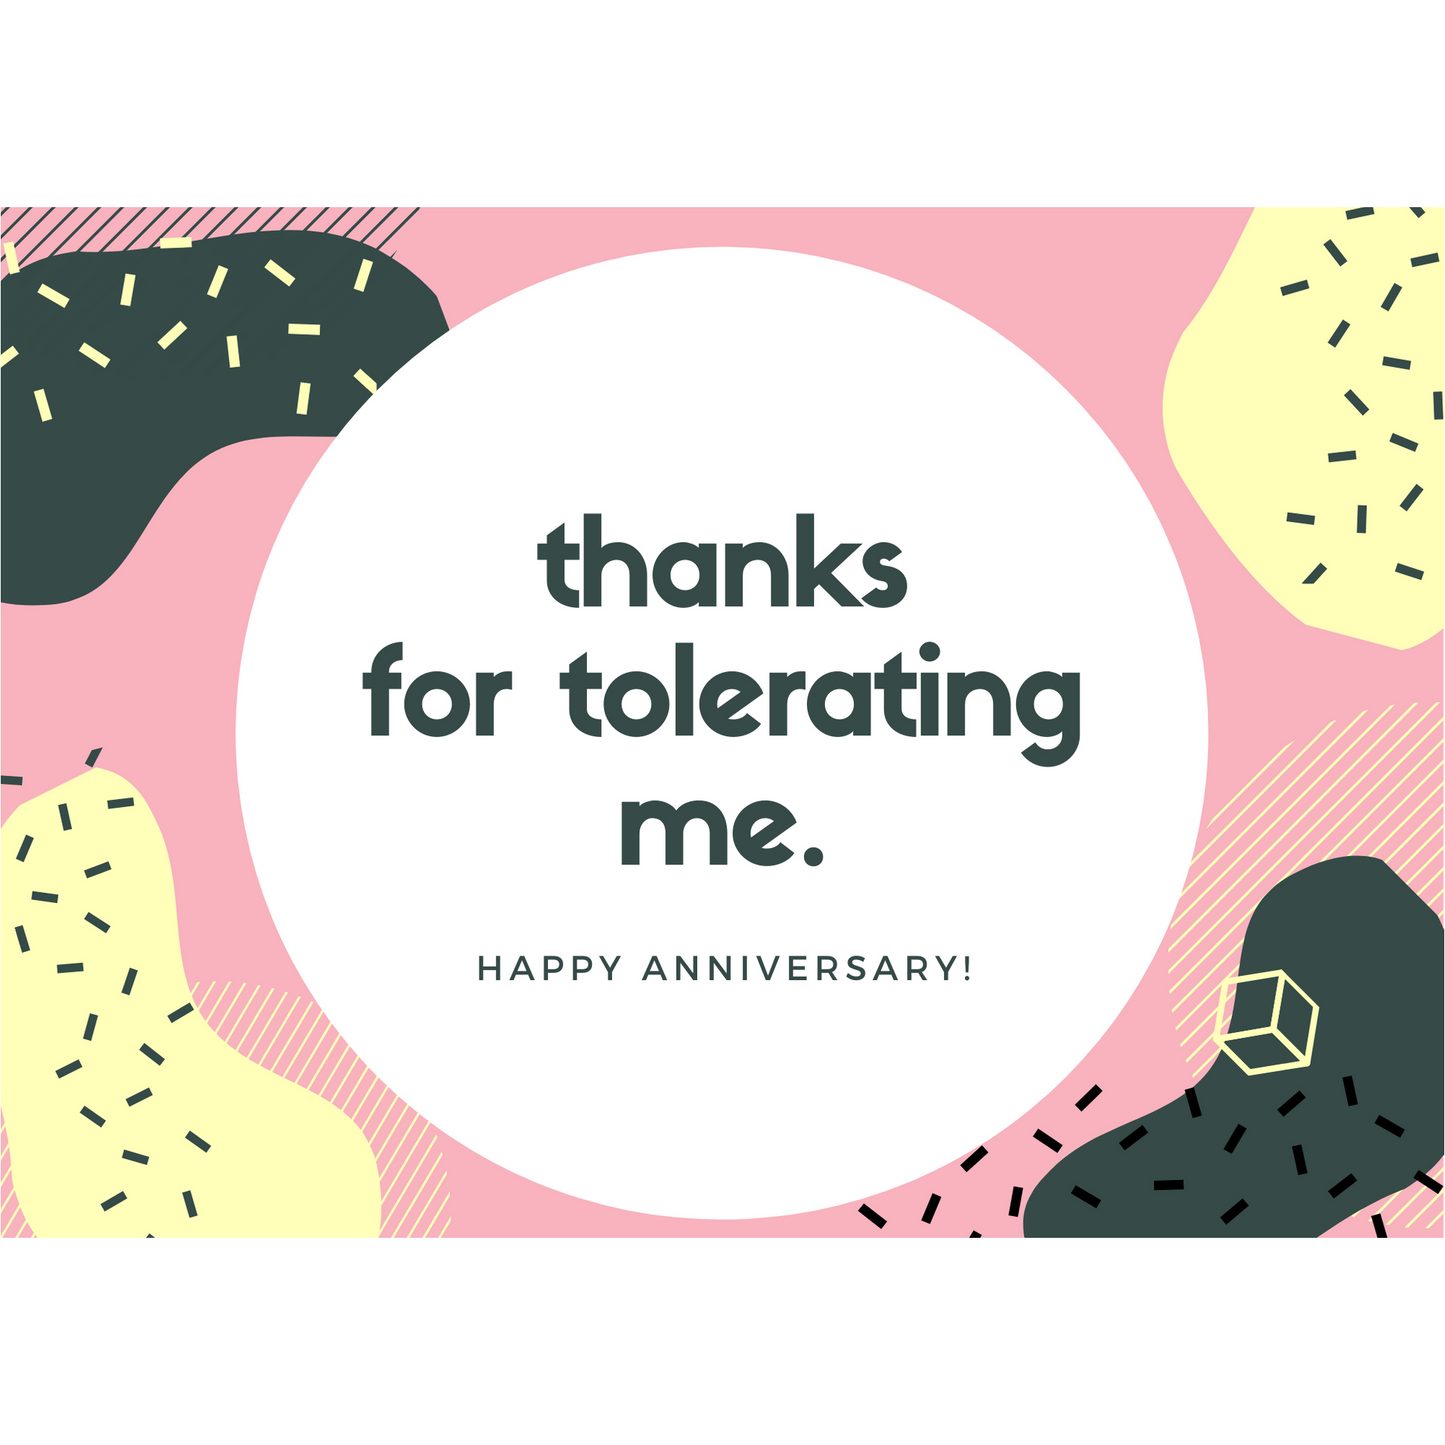 Thanks for tolerating me - anniversary